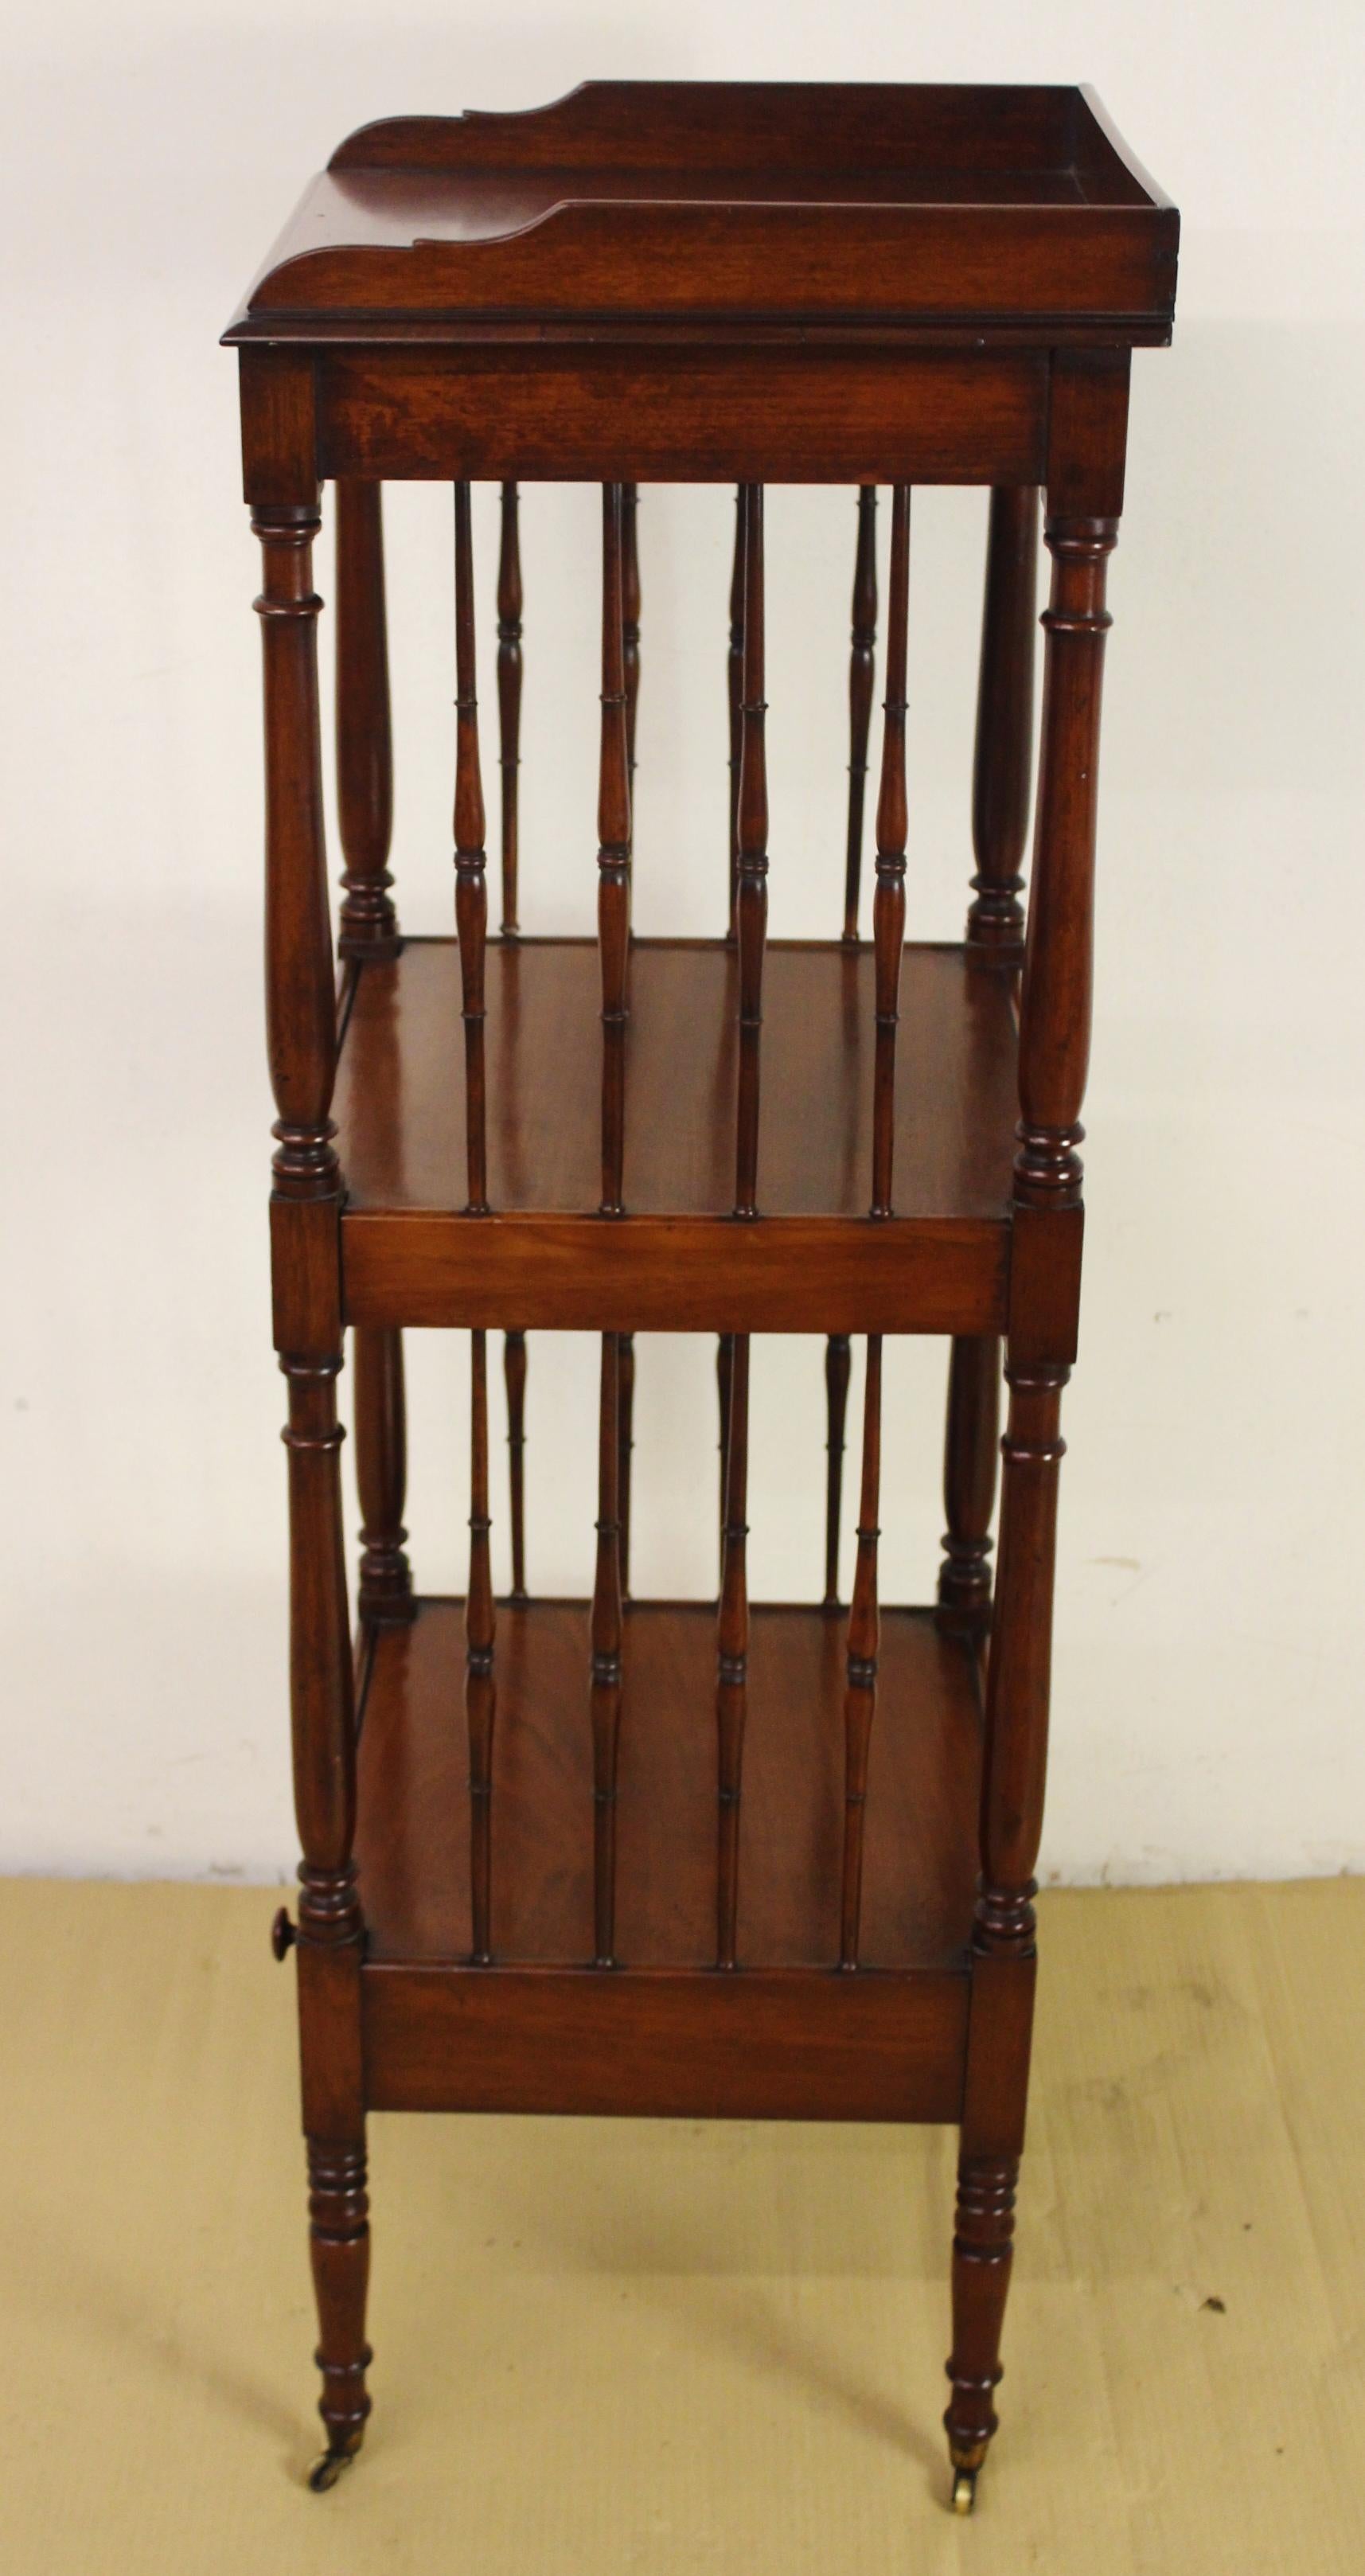 An excellent mid-Victorian period mahogany 3 tier wot not, or dumb waiter. Very well made in solid mahogany, now with a great color and patina. Three tiers, supported by turned columns and with lovely tuned spindles in between. A single drawer to